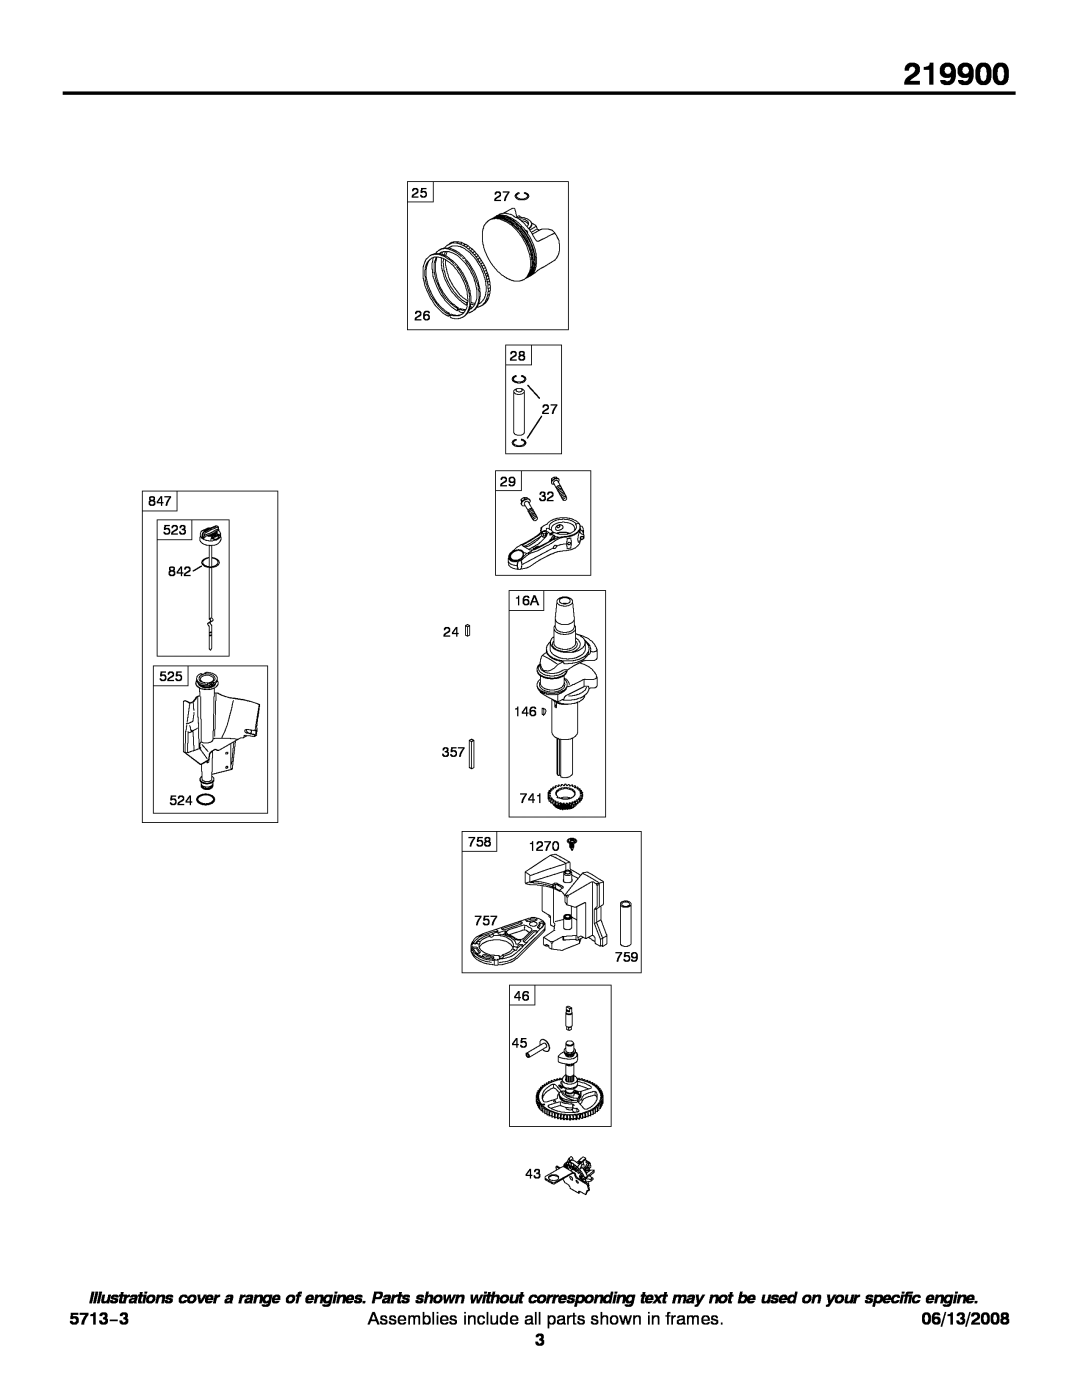 Snapper 219900 service manual 5713−3, Assemblies include all parts shown in frames, 06/13/2008 